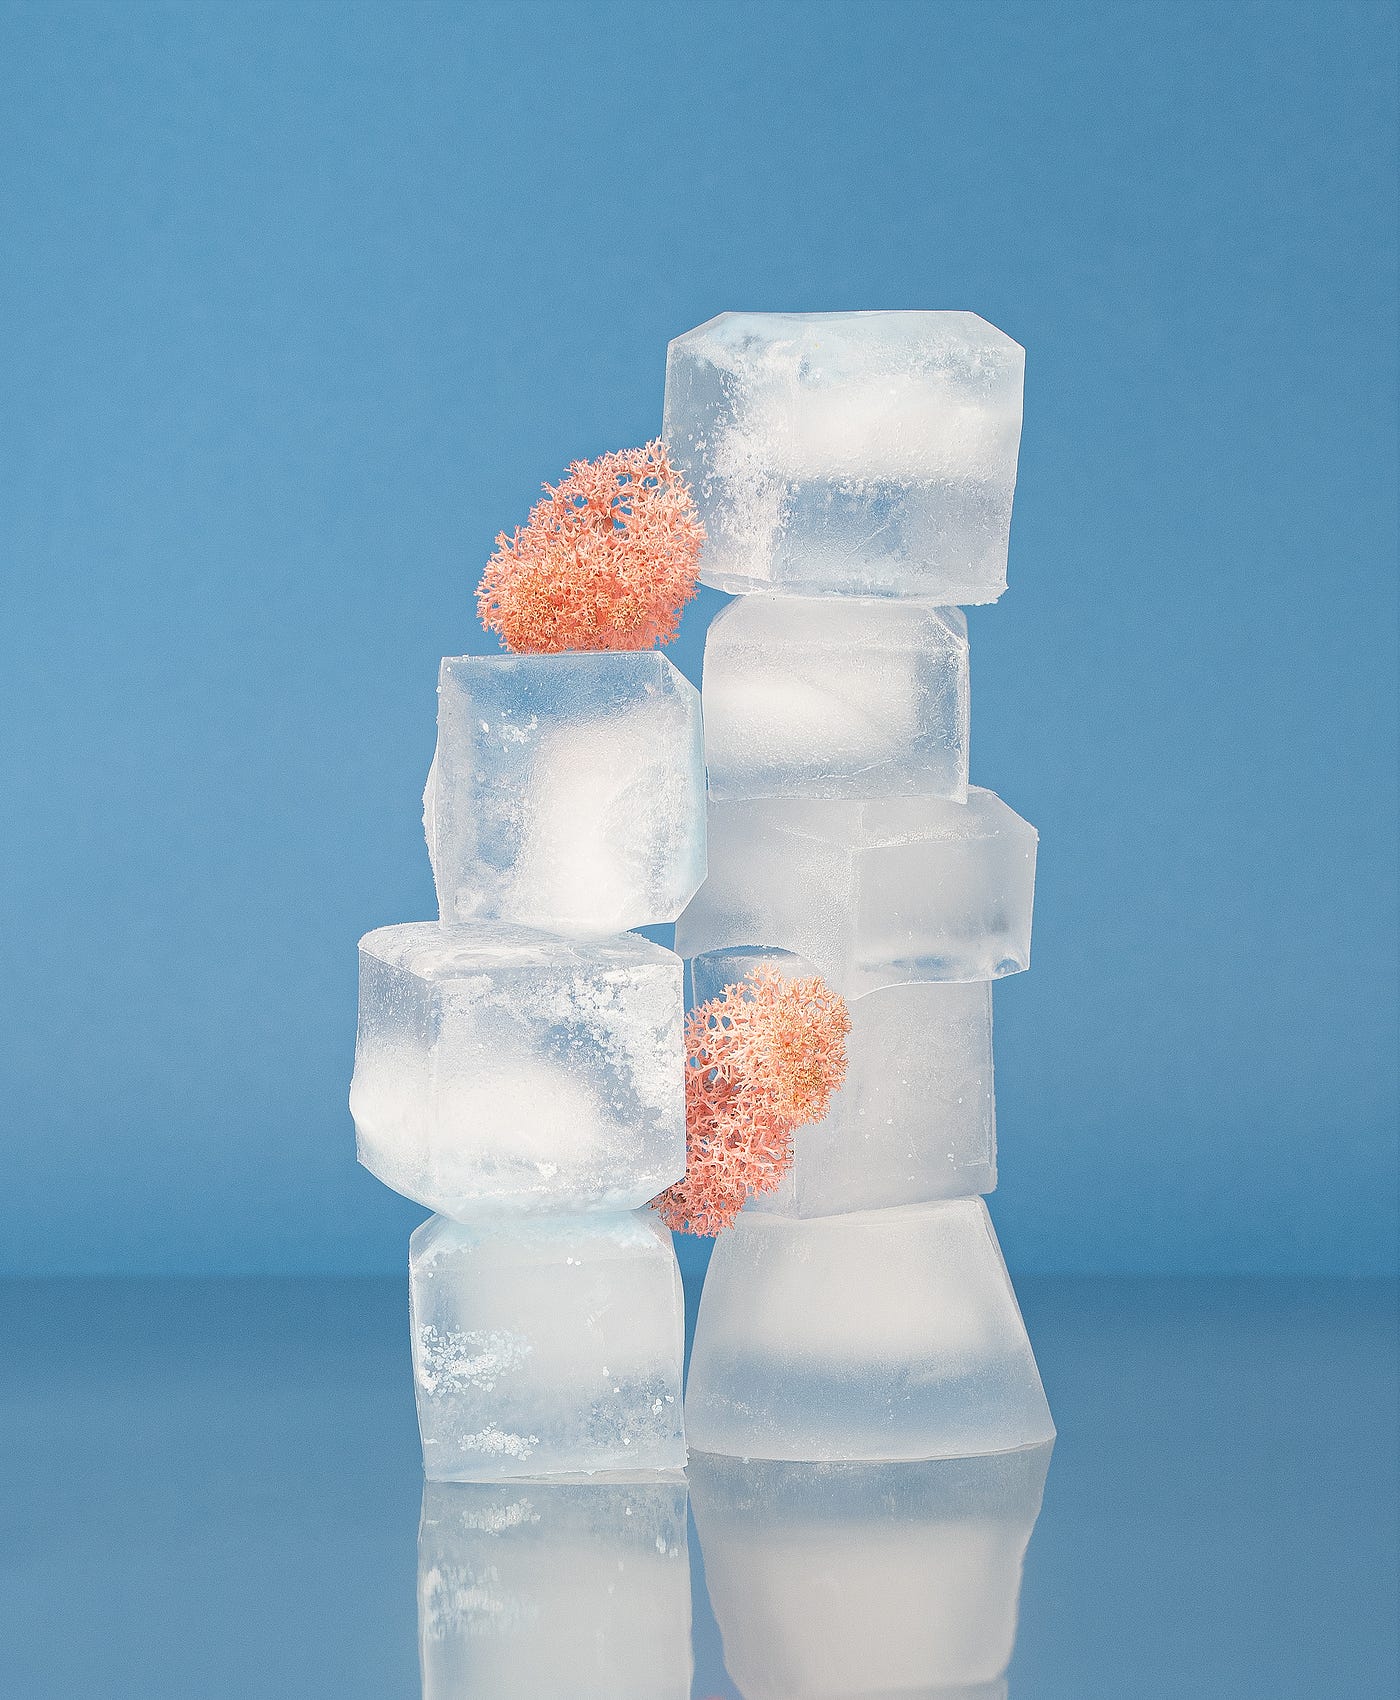 Try Oral sex and Foreplay with Ice Cubes